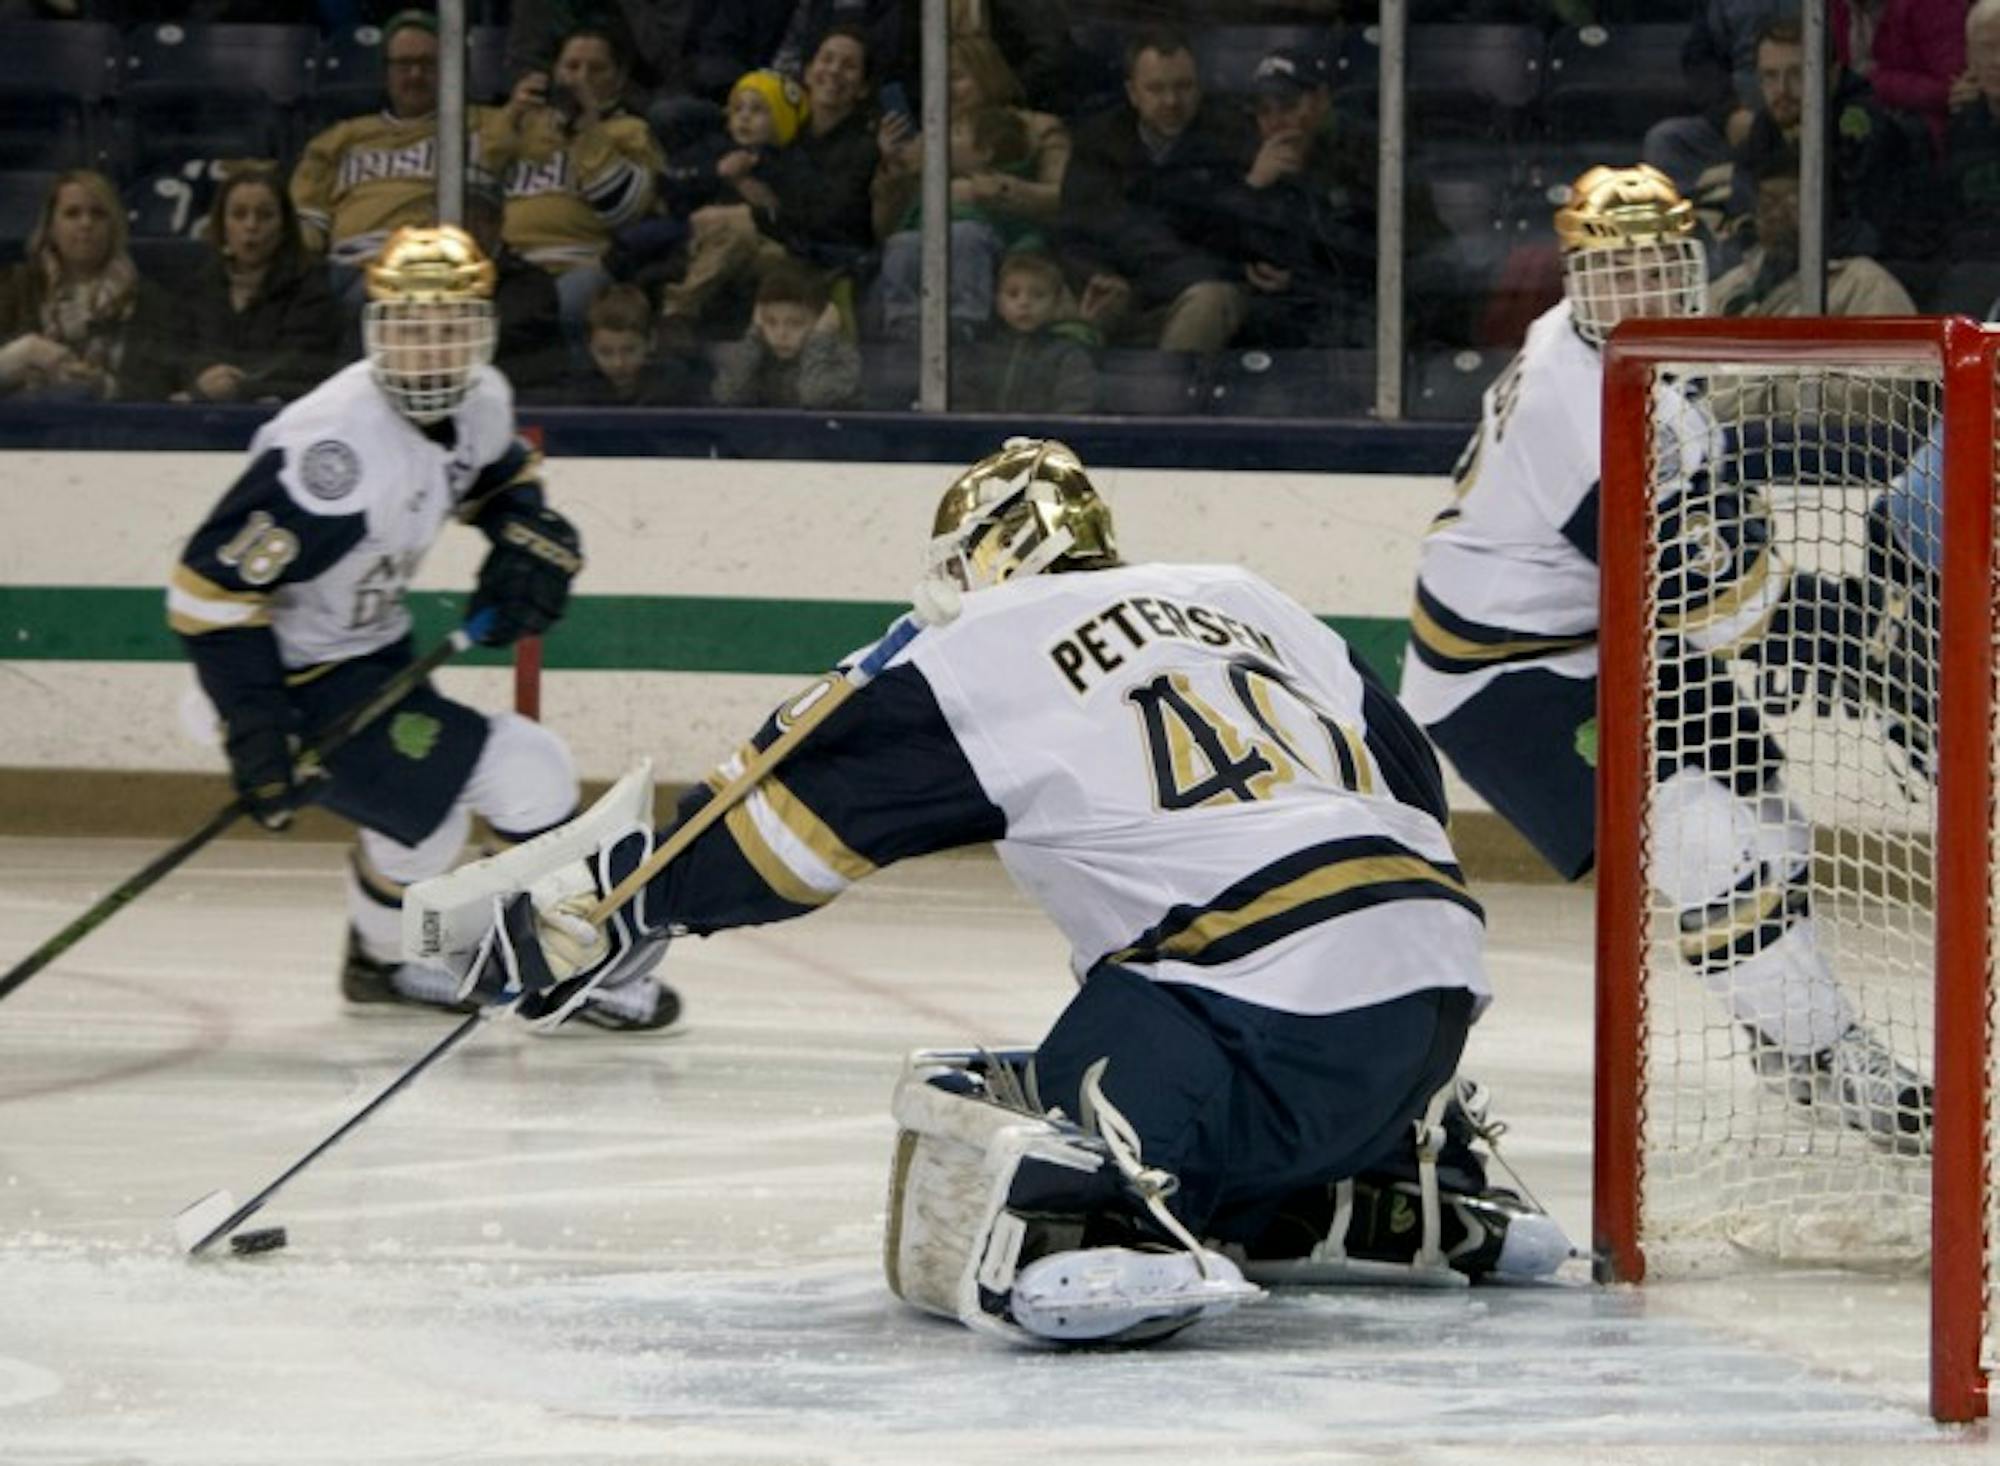 Irish sophomore goaltender Cal Petersen corrals a loose puck during Notre Dame’s 5-1 win over Maine on Saturday.